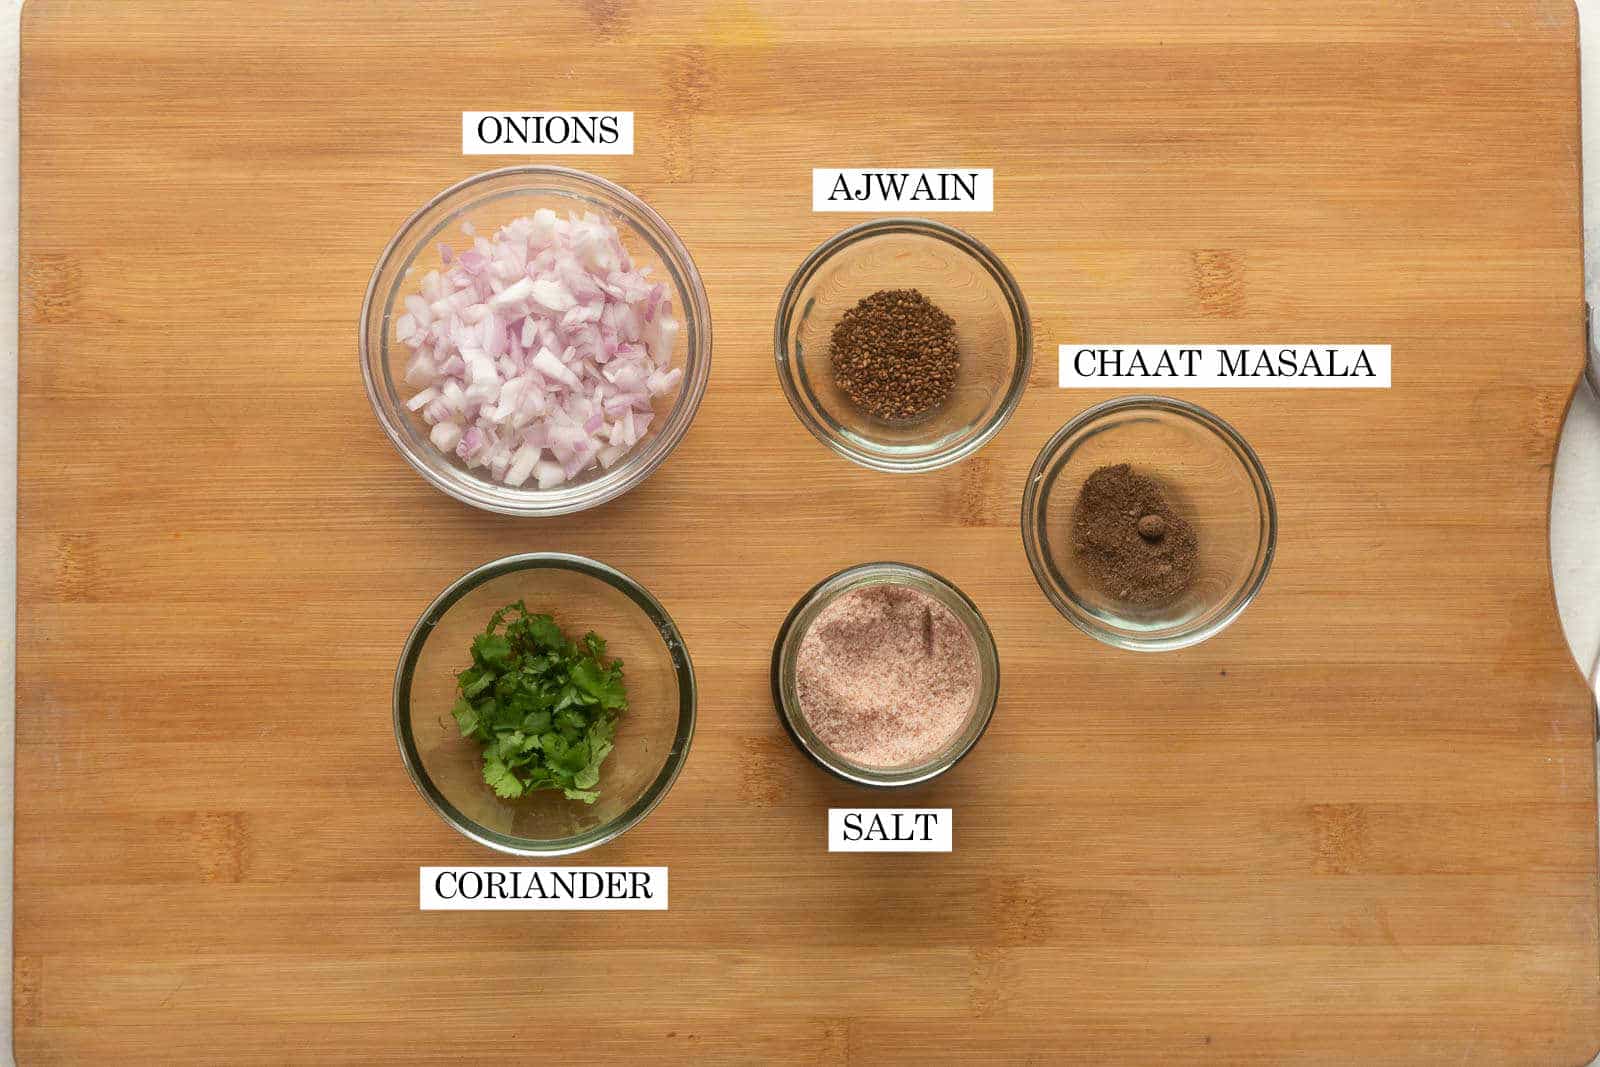 Picture of all the ingredients required for the onion filling